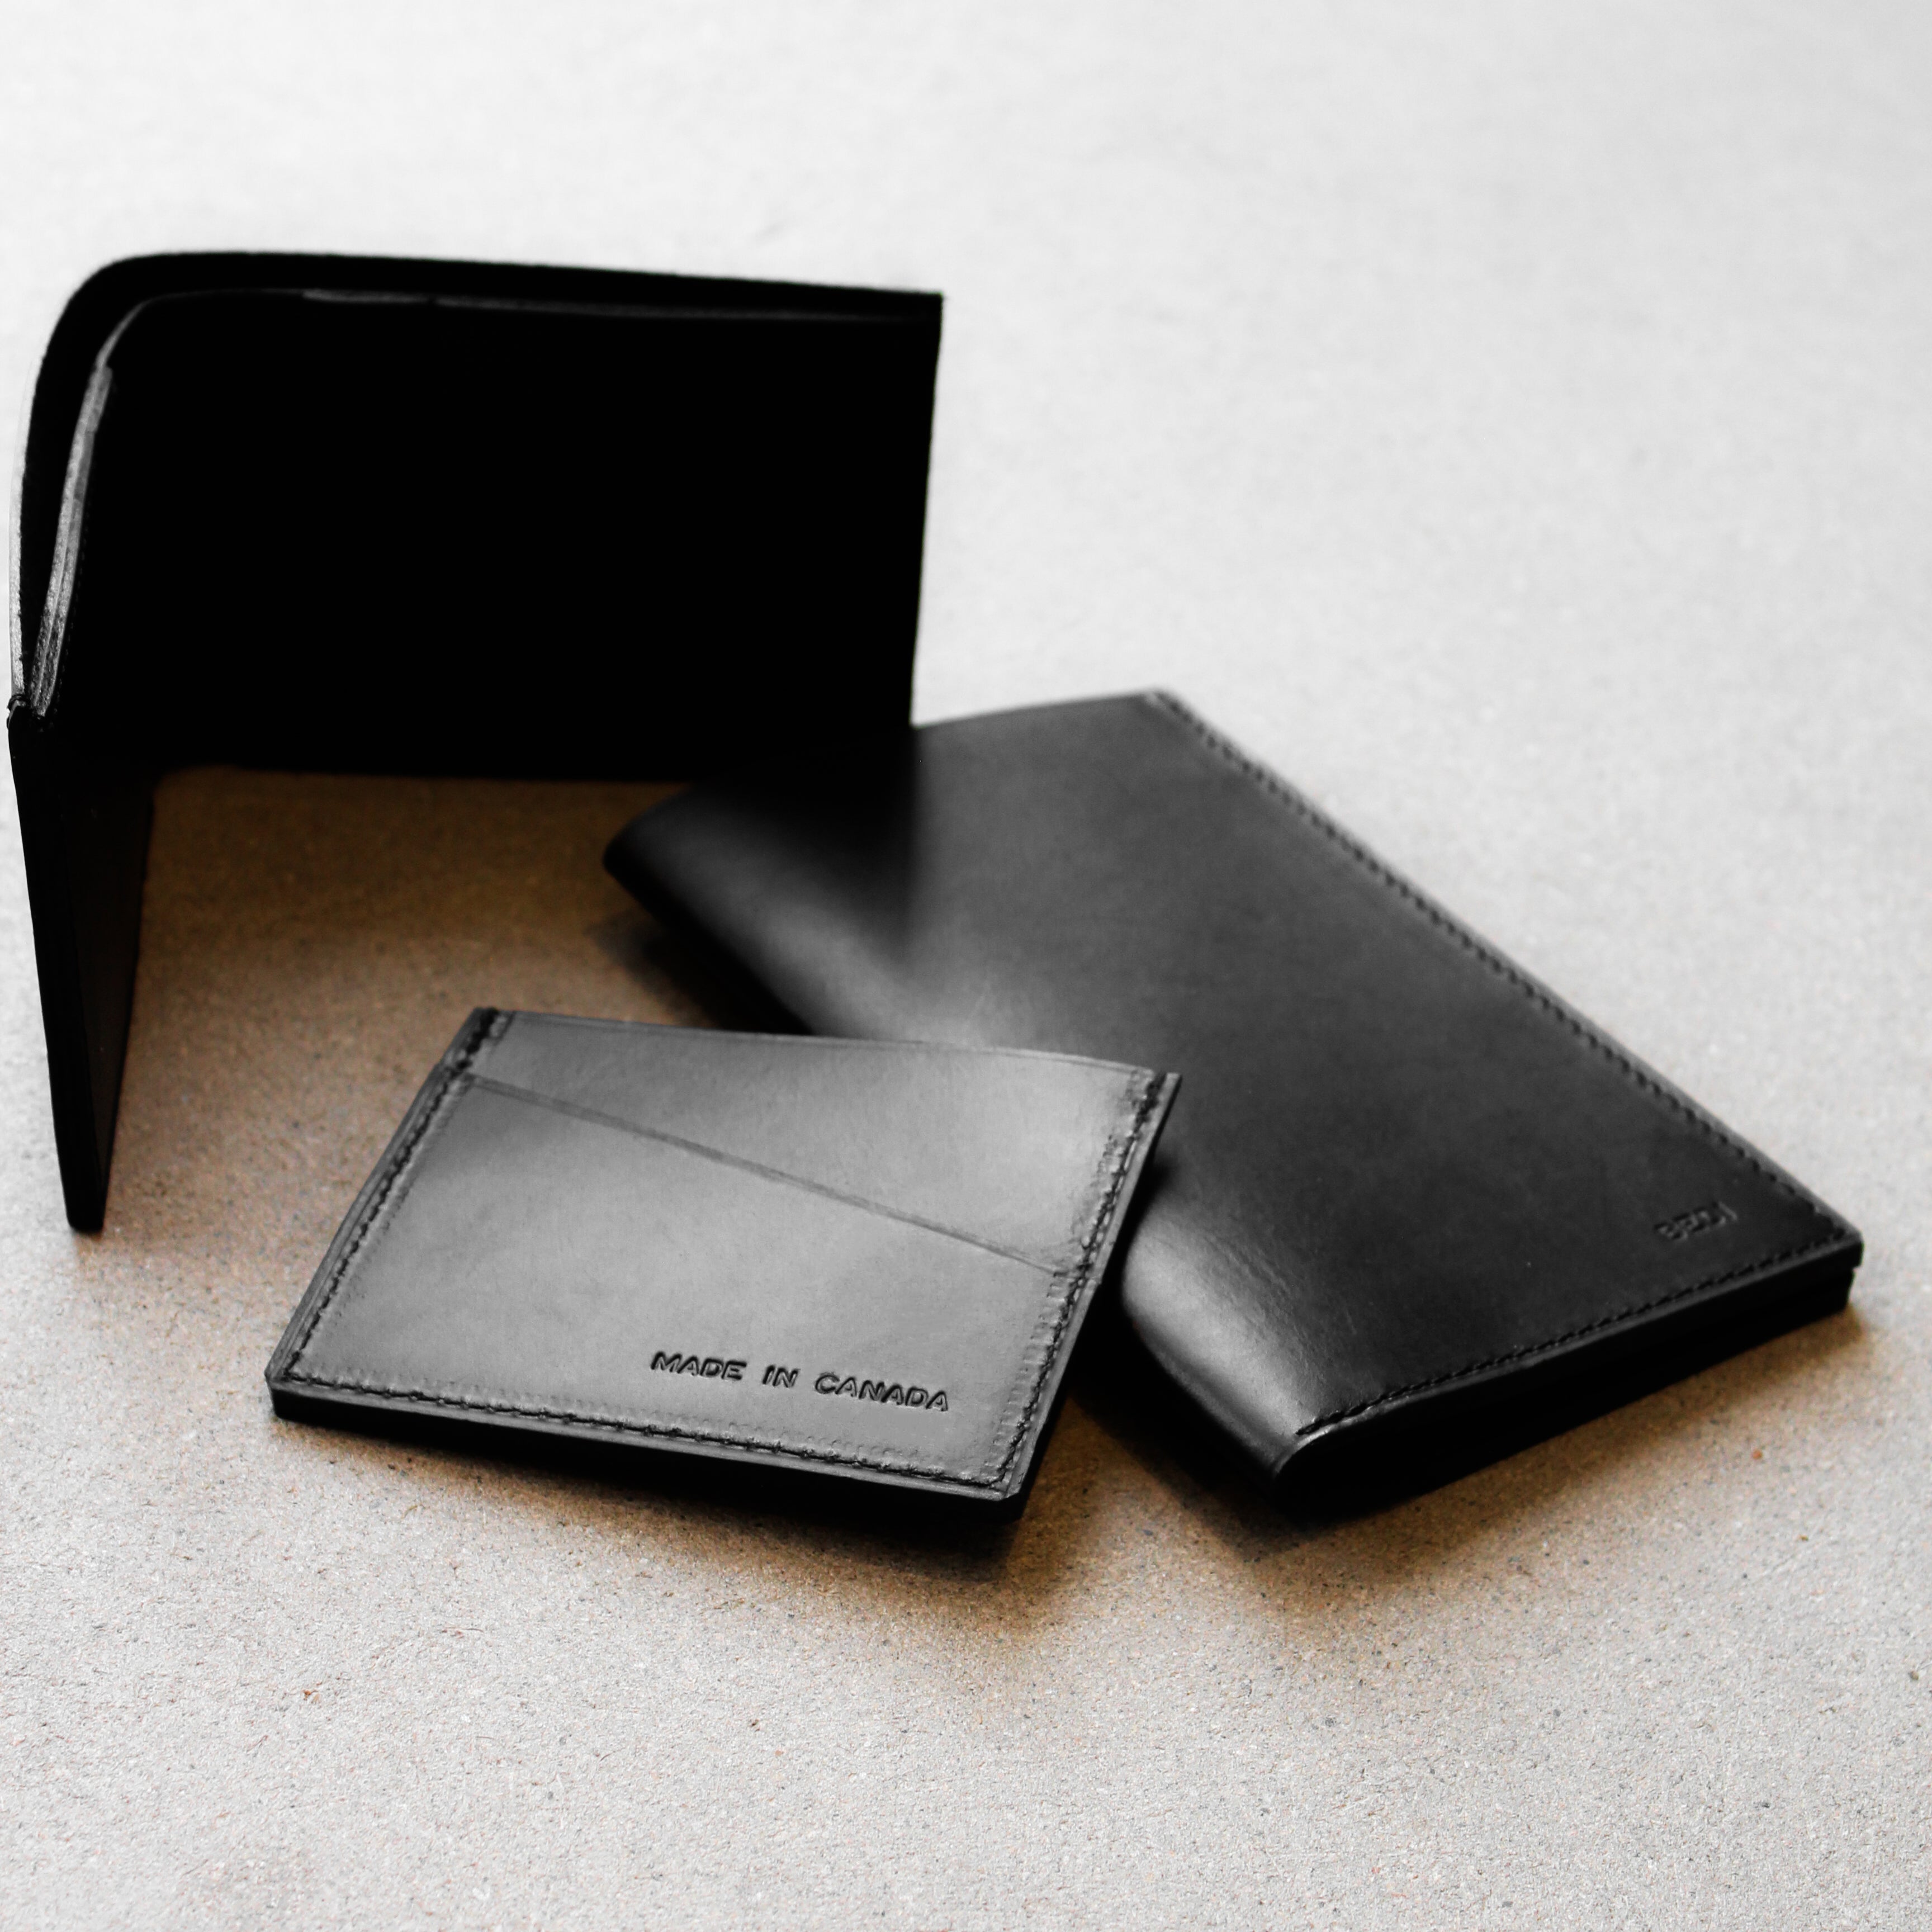 Group of three black leather wallets on a textured grey surface